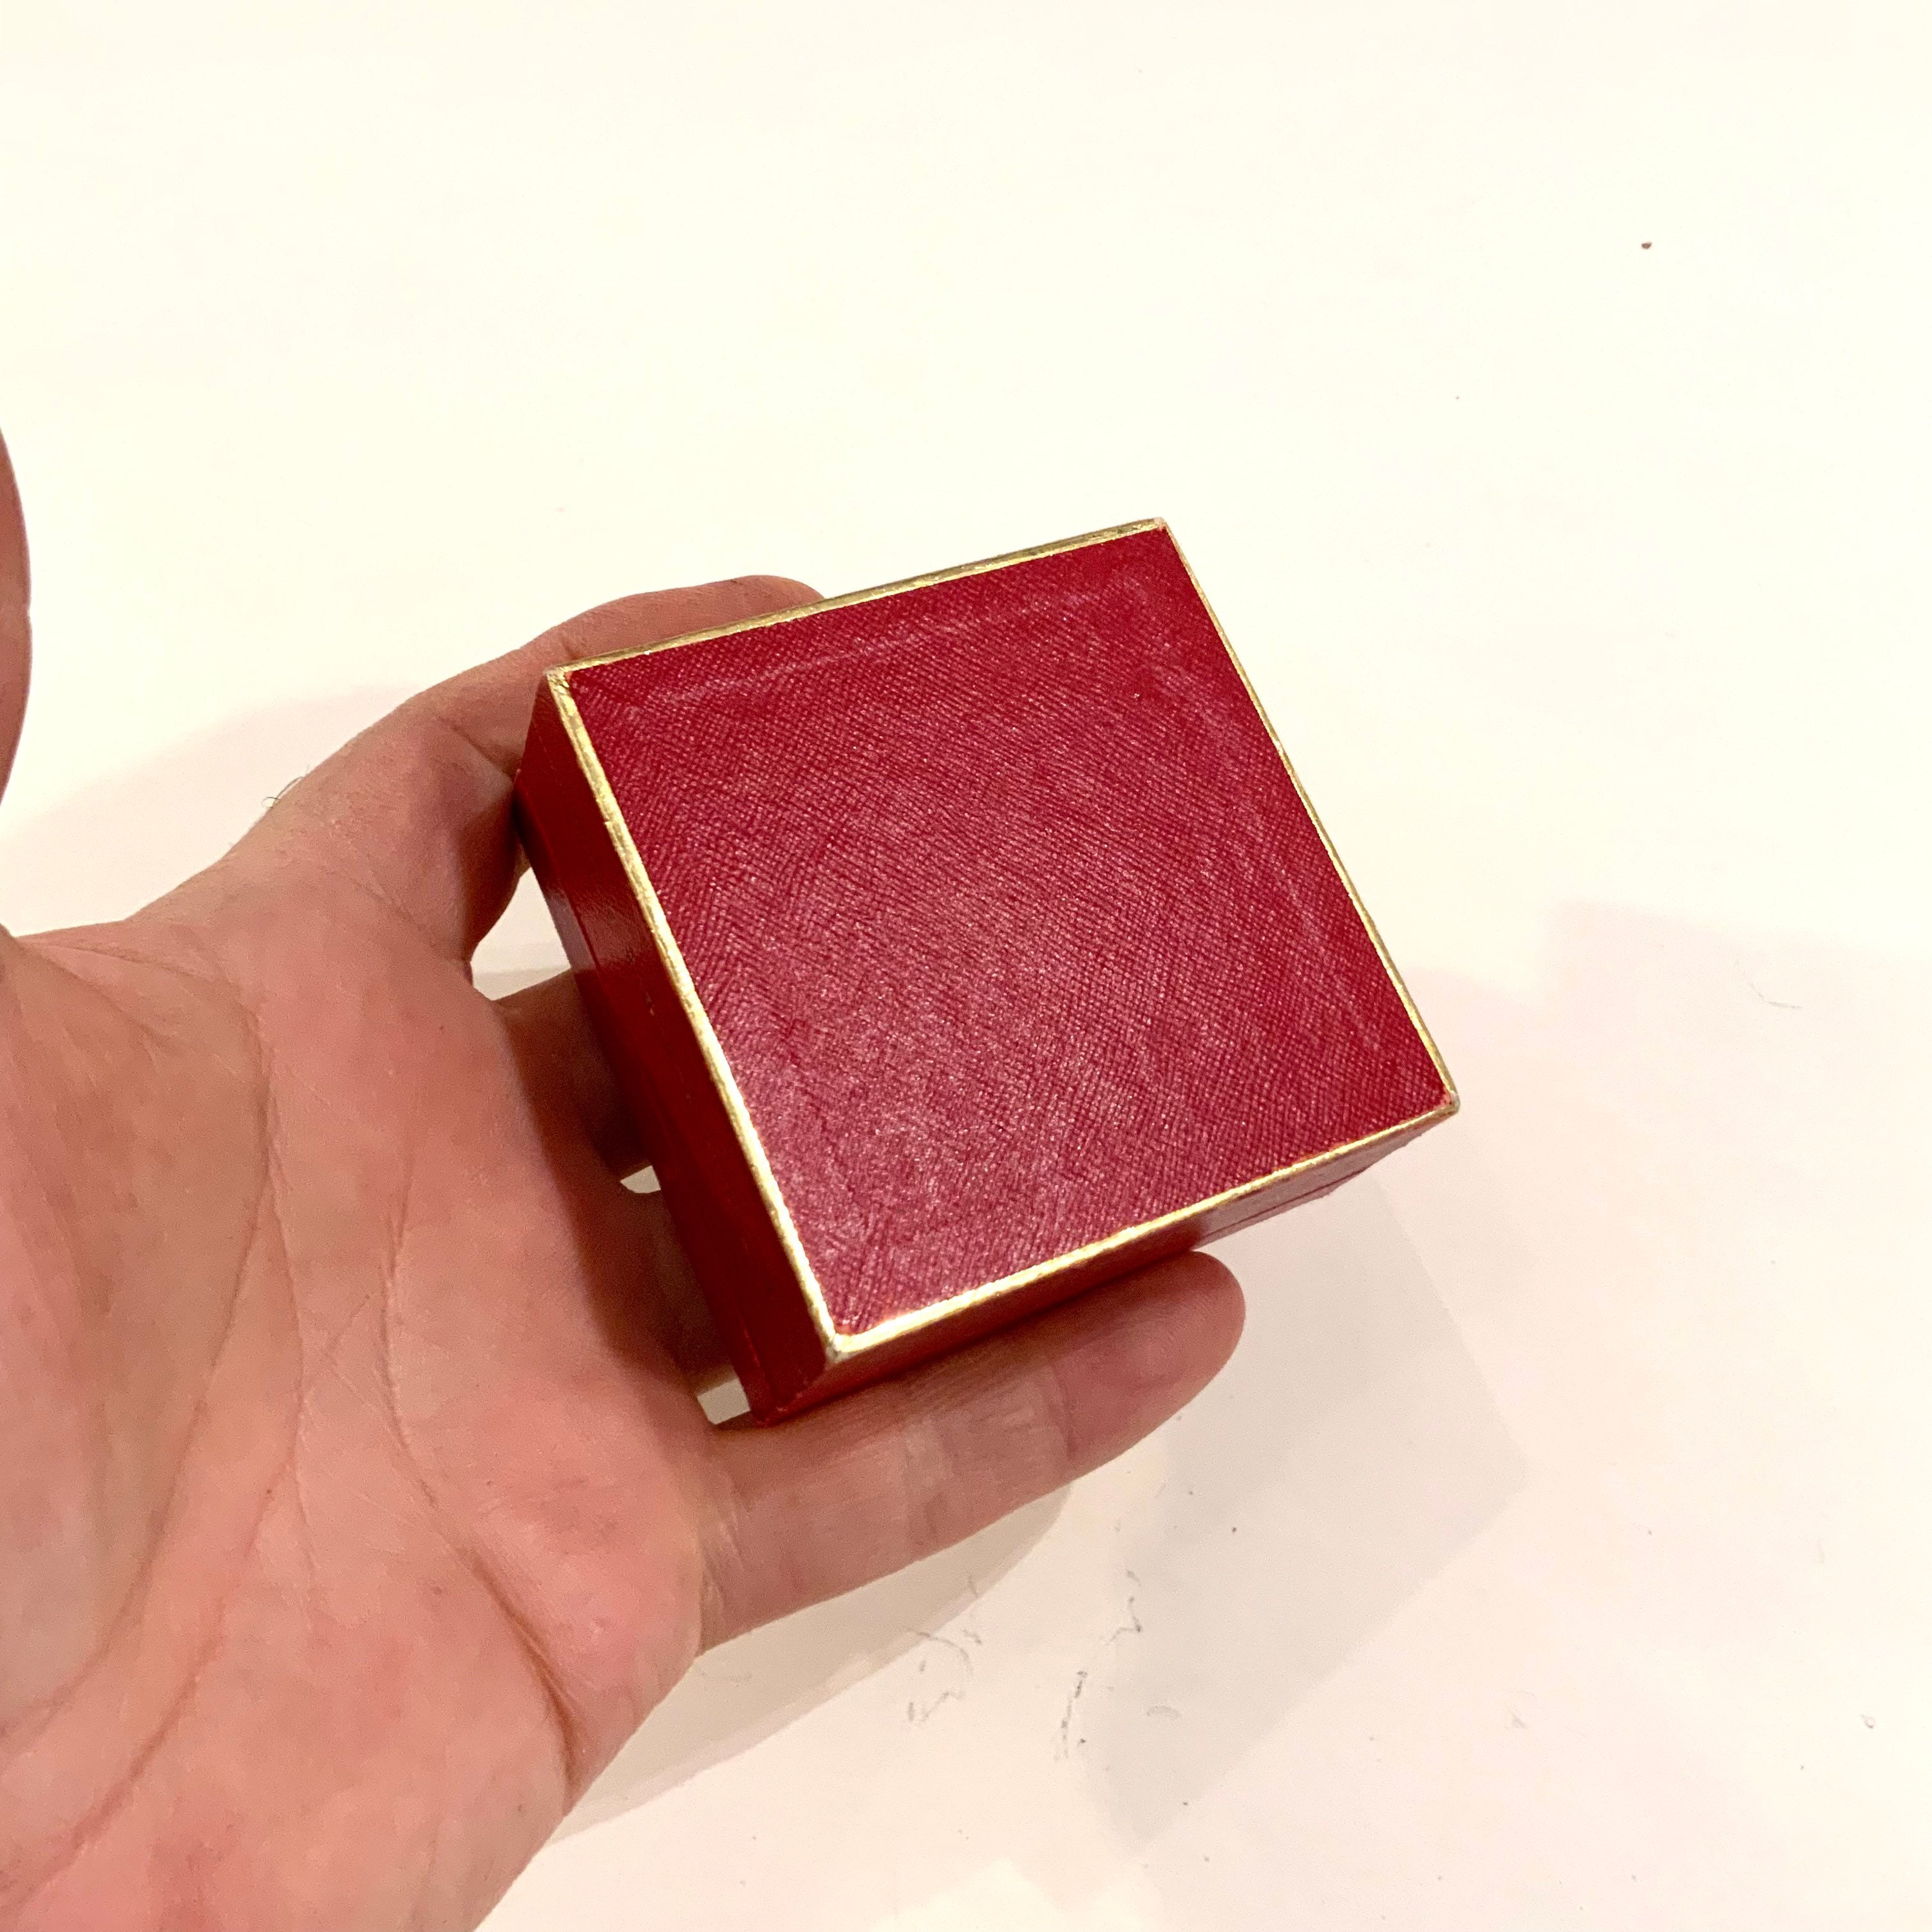 Authentic Cartier RED Ring Case Box with Red Box/paper bag/ribbon SET F/S ②